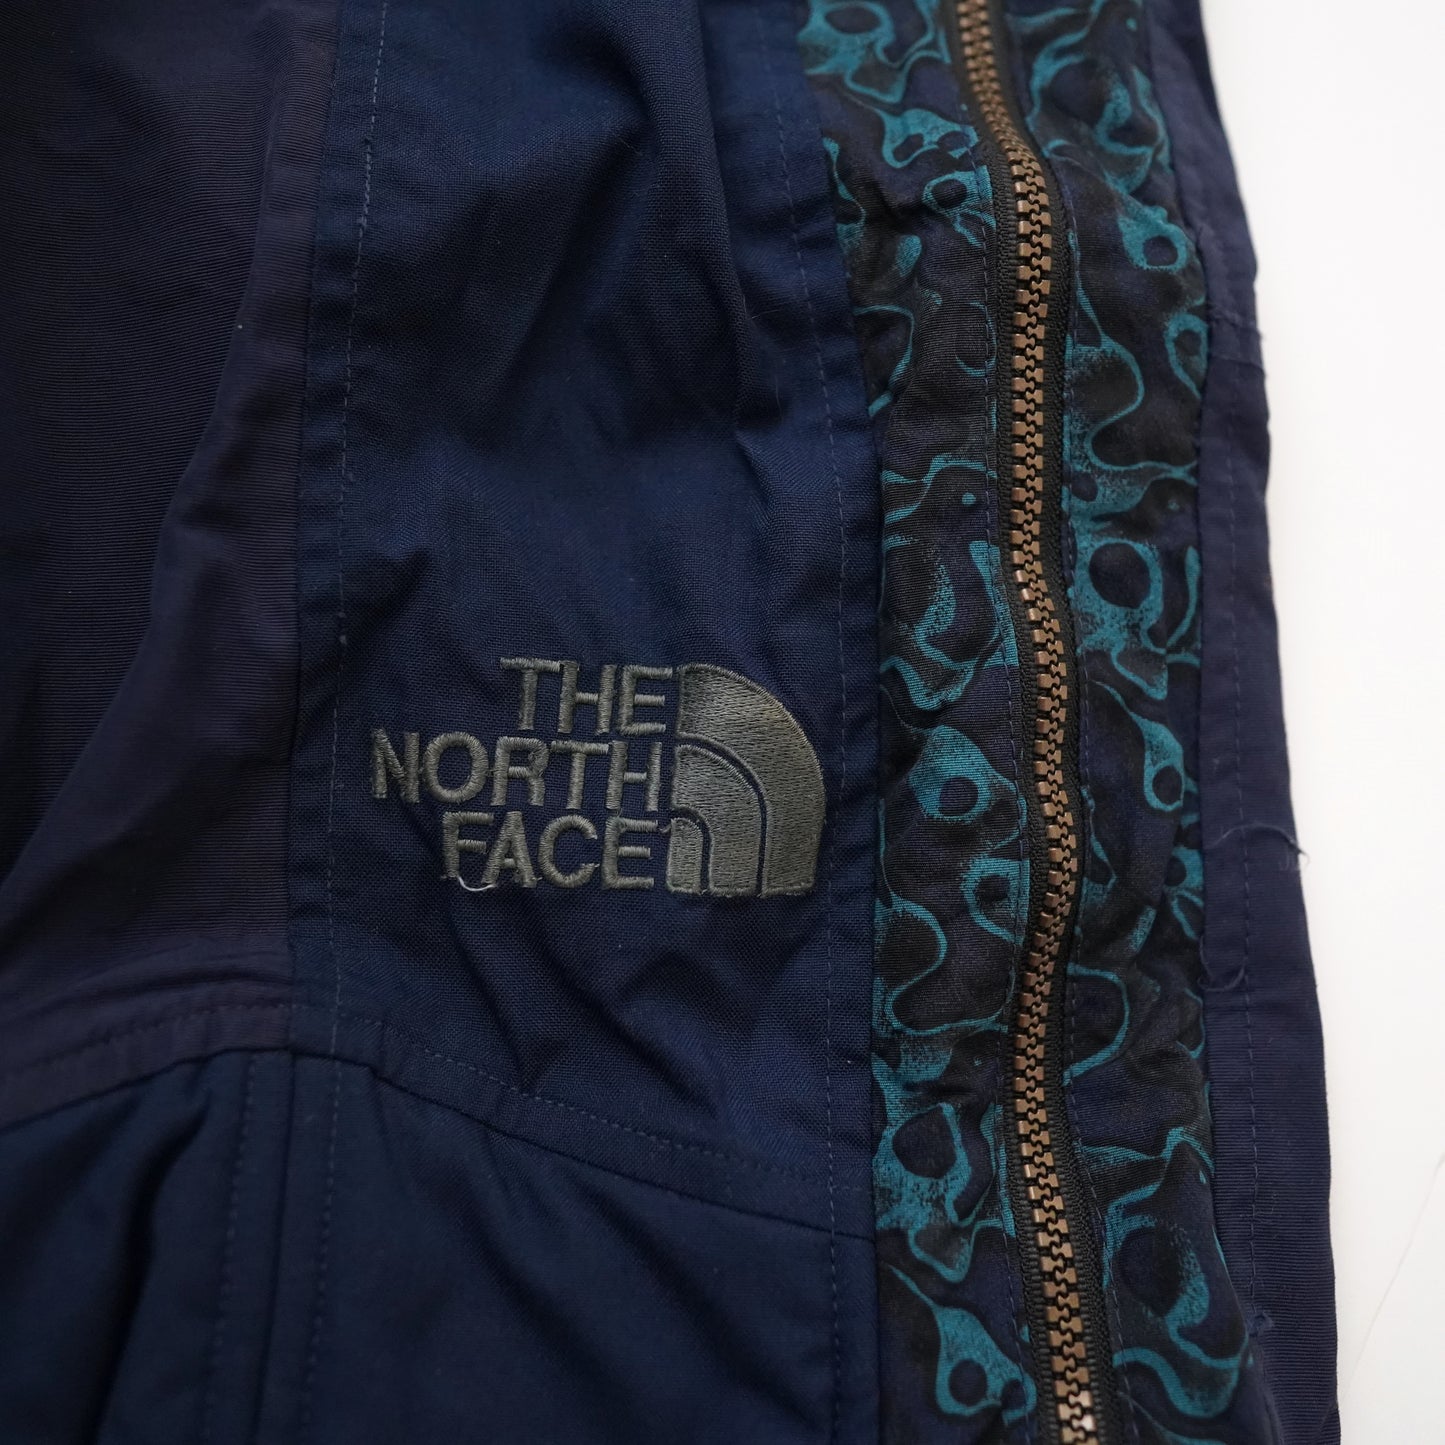 THE NORTH FACE winter sport pants